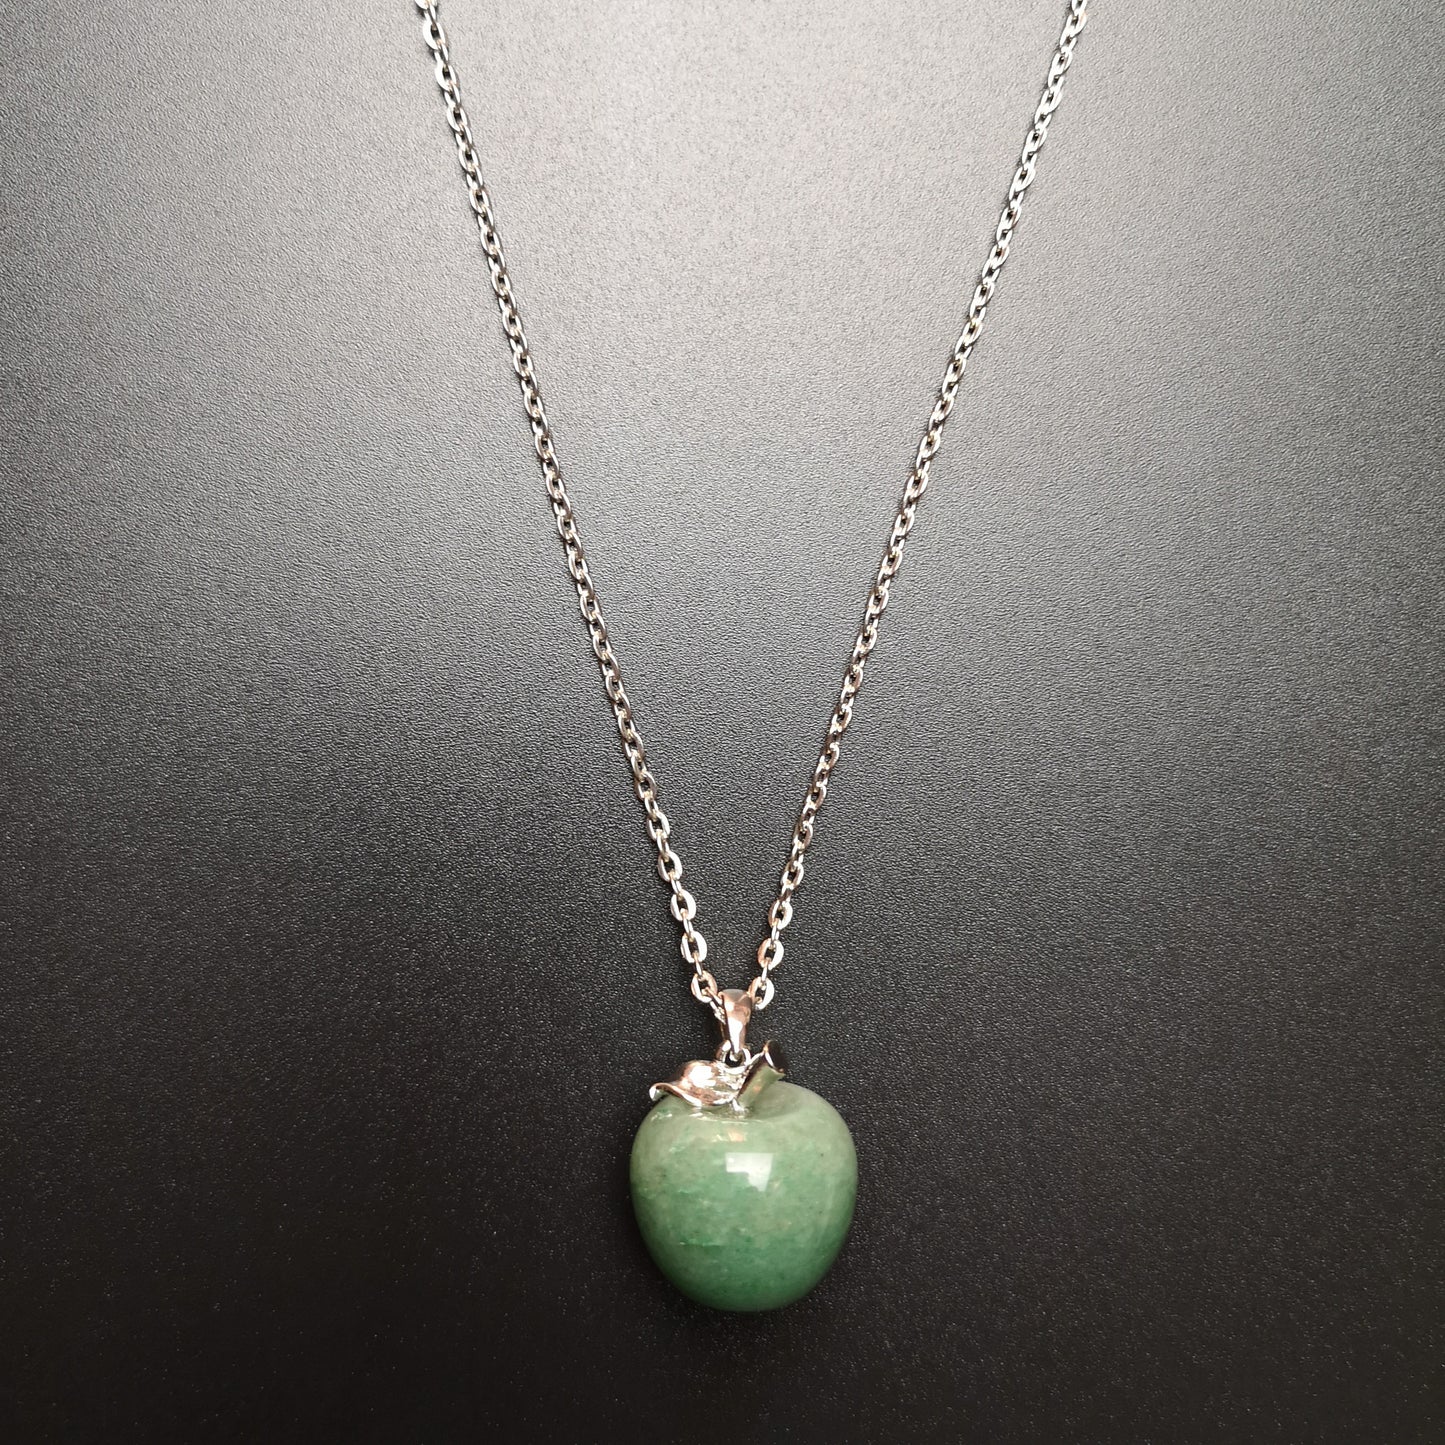 Aventurine apple gemstone necklace - The French Witch shop